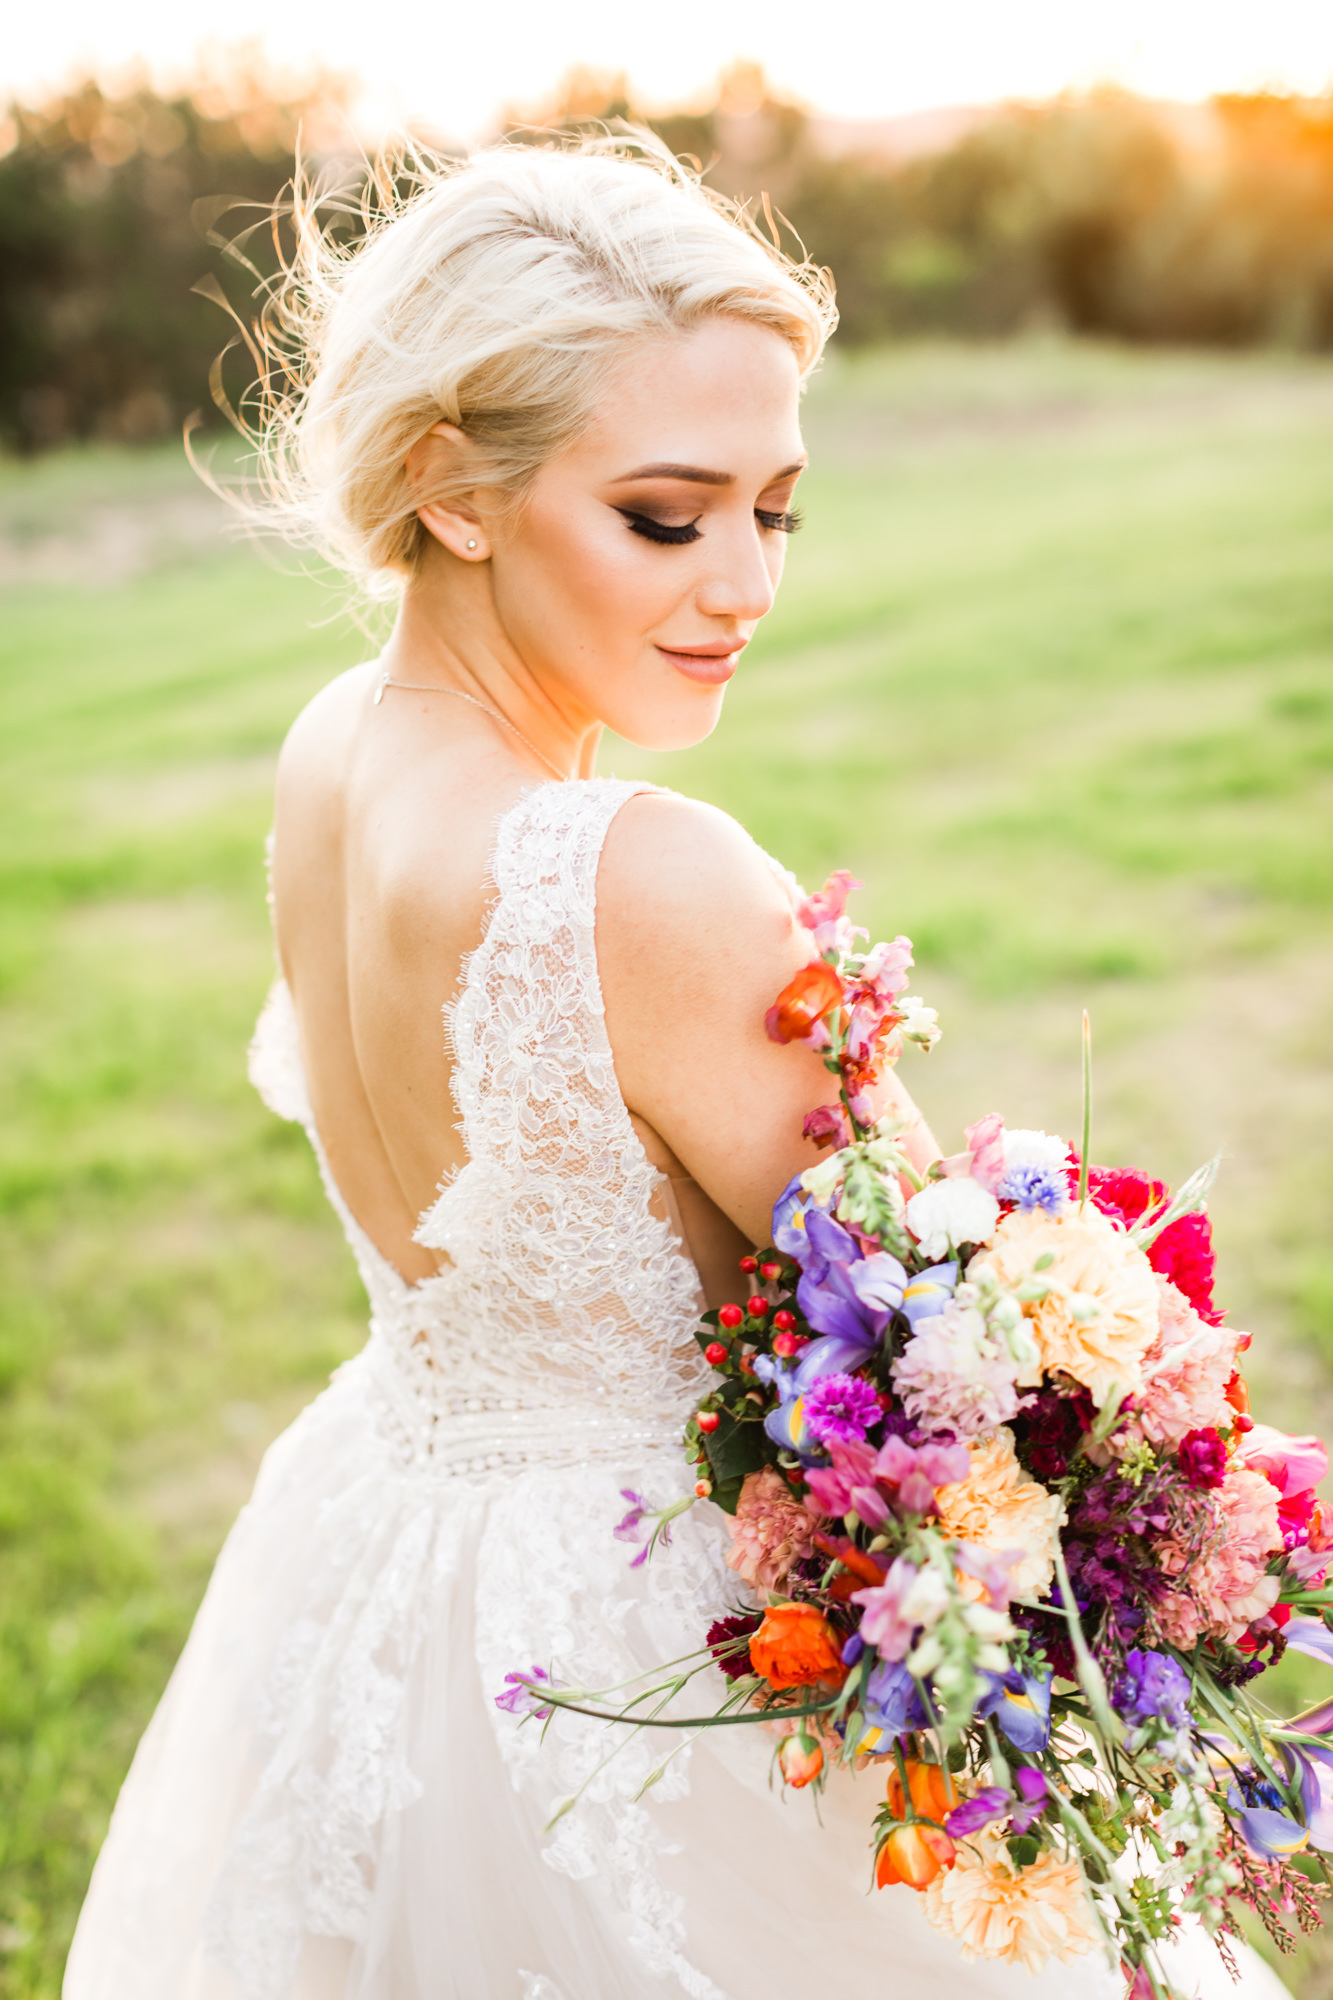 bridal portraits with bride wearing lace gown holding colorful bridal bouquet